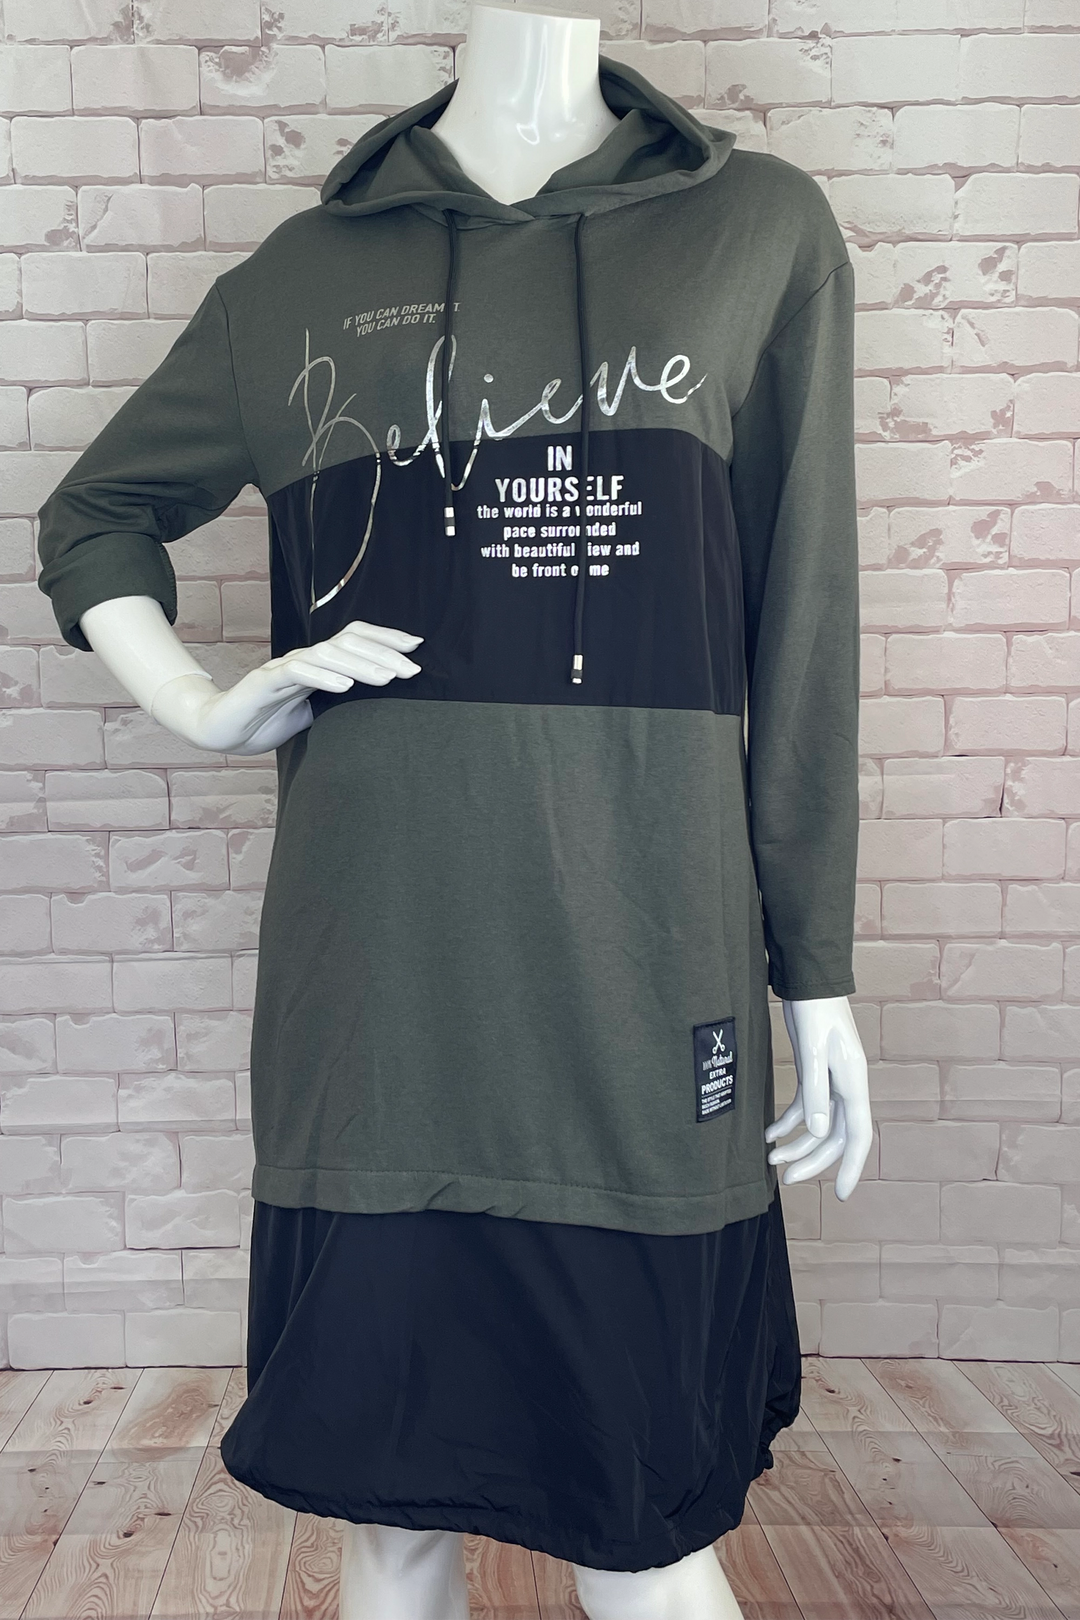 With its lightweight, relaxed fit and two-tone army colours, this casual hoodie dress brings a touch of effortless, timeless style to any wardrobe.